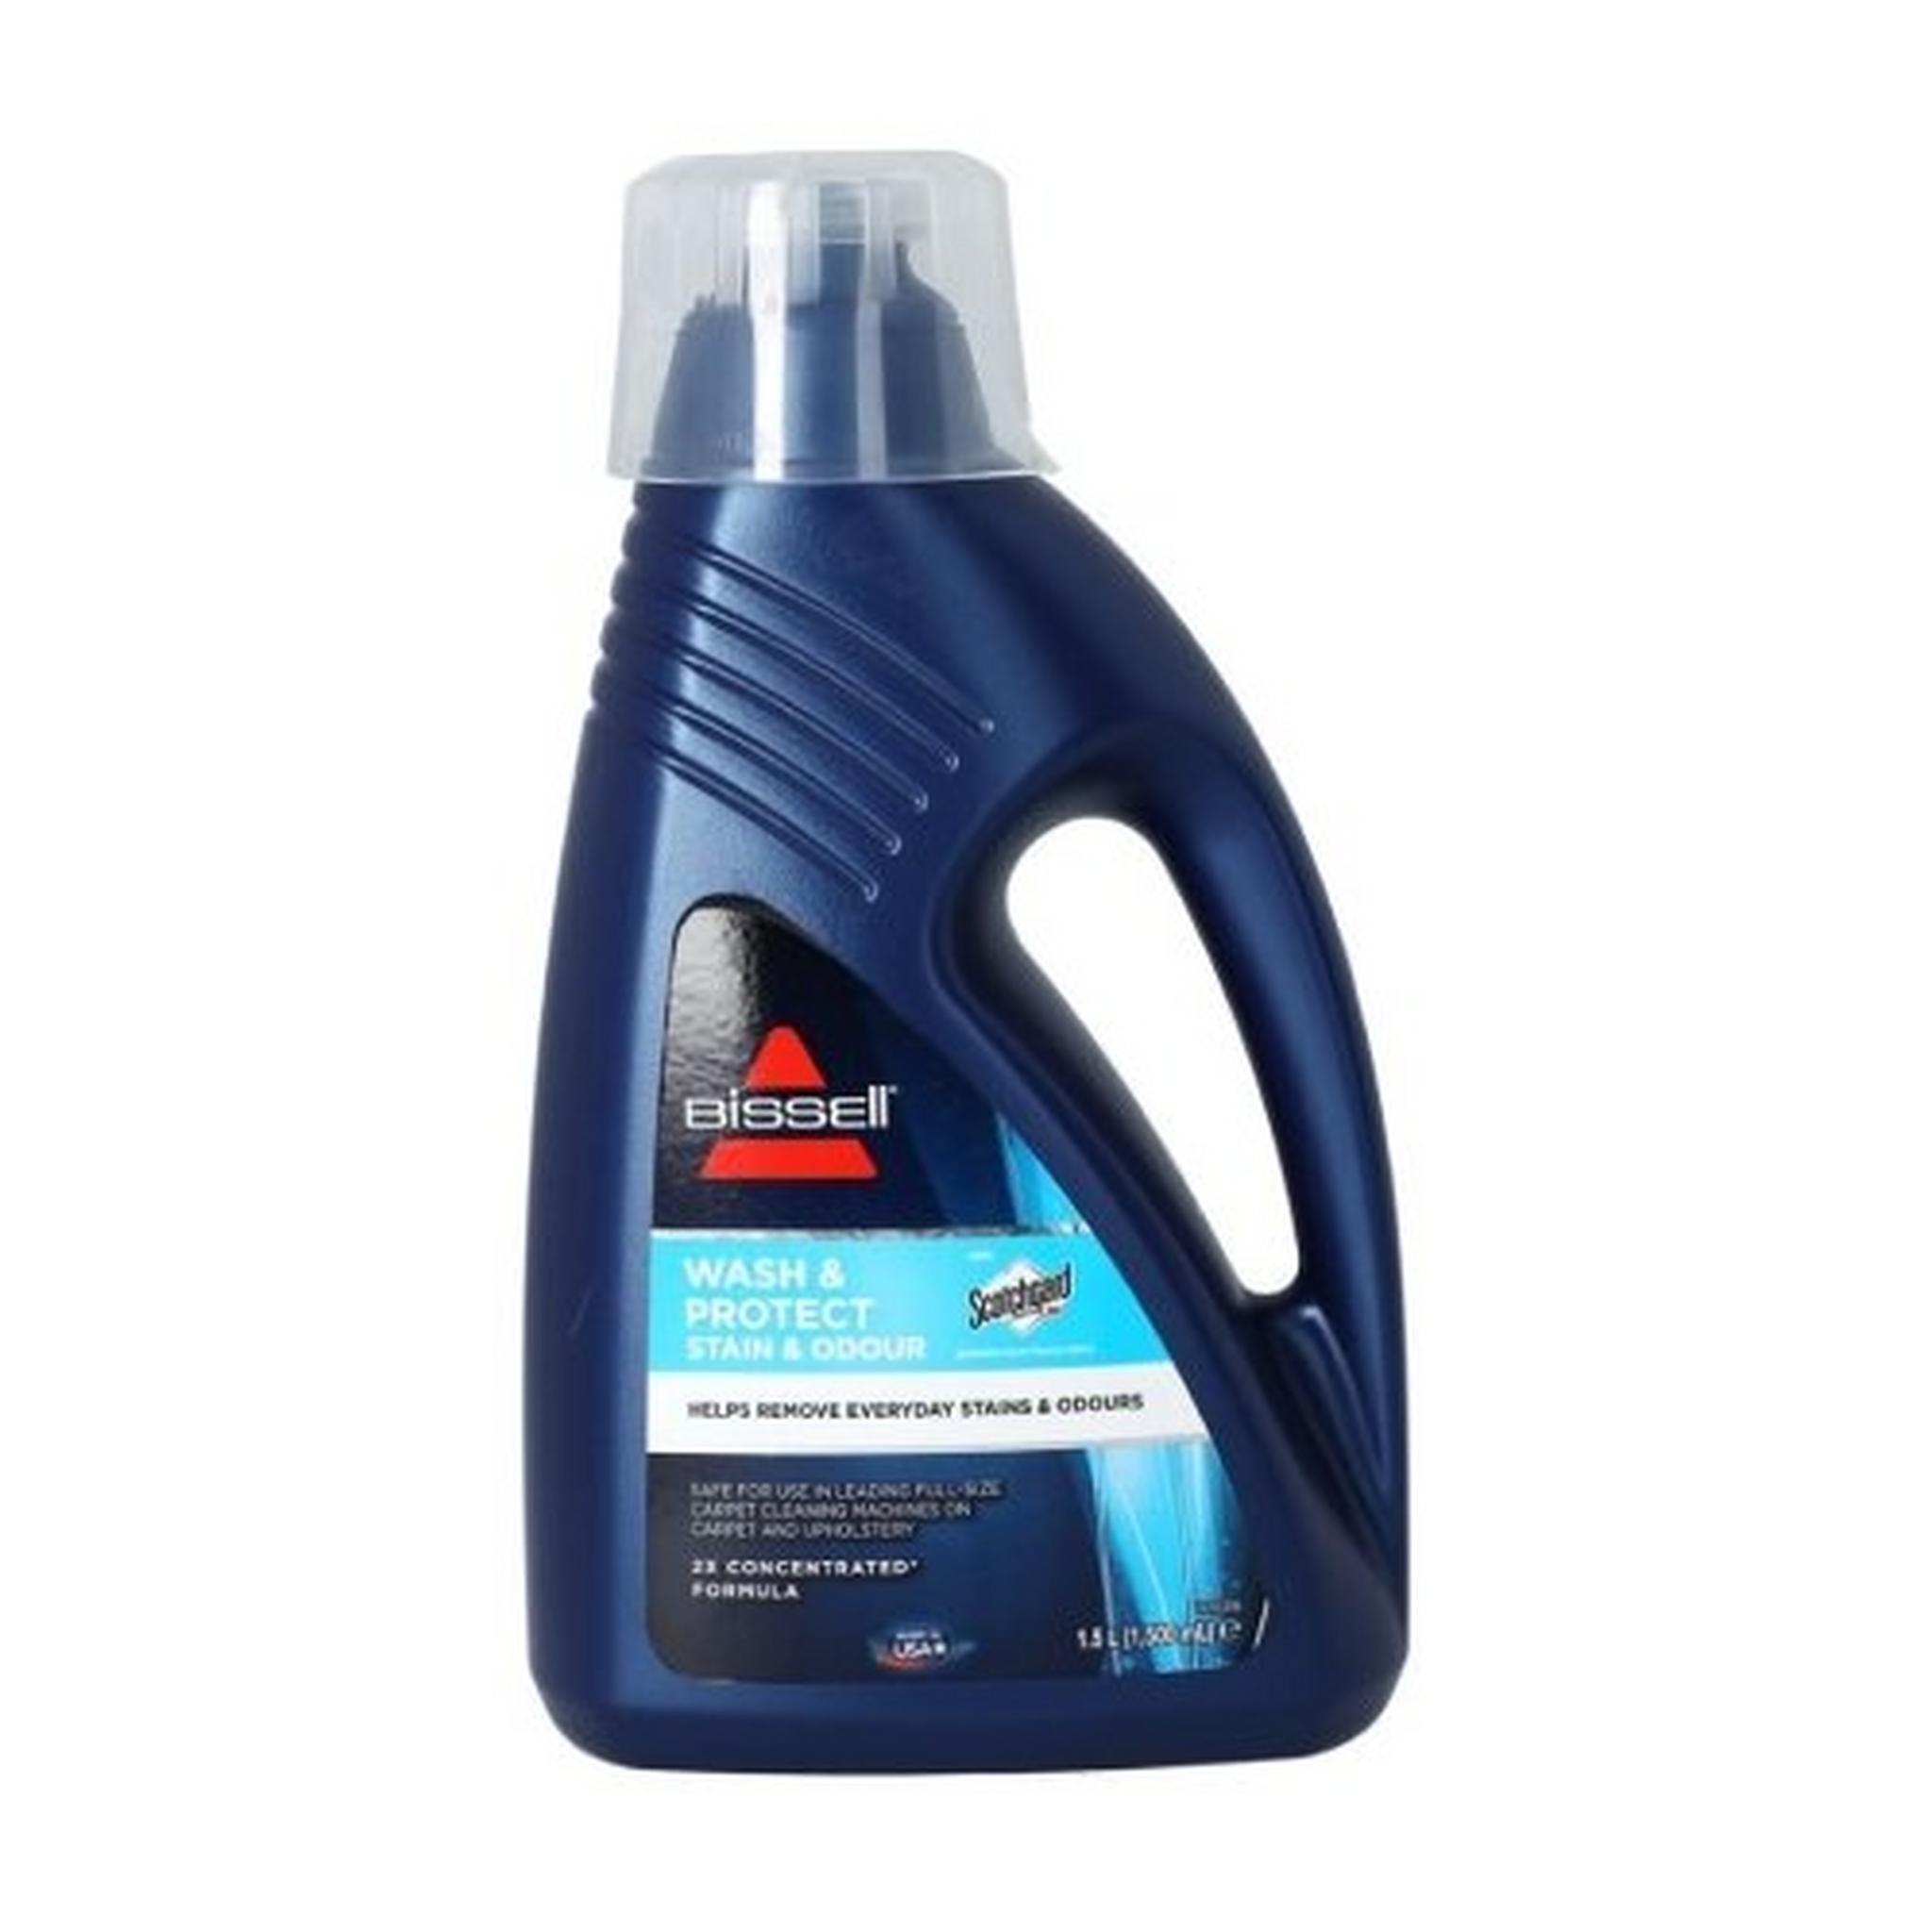 Bissel Wash & Protect - Stain & Odour Carpet Cleaner